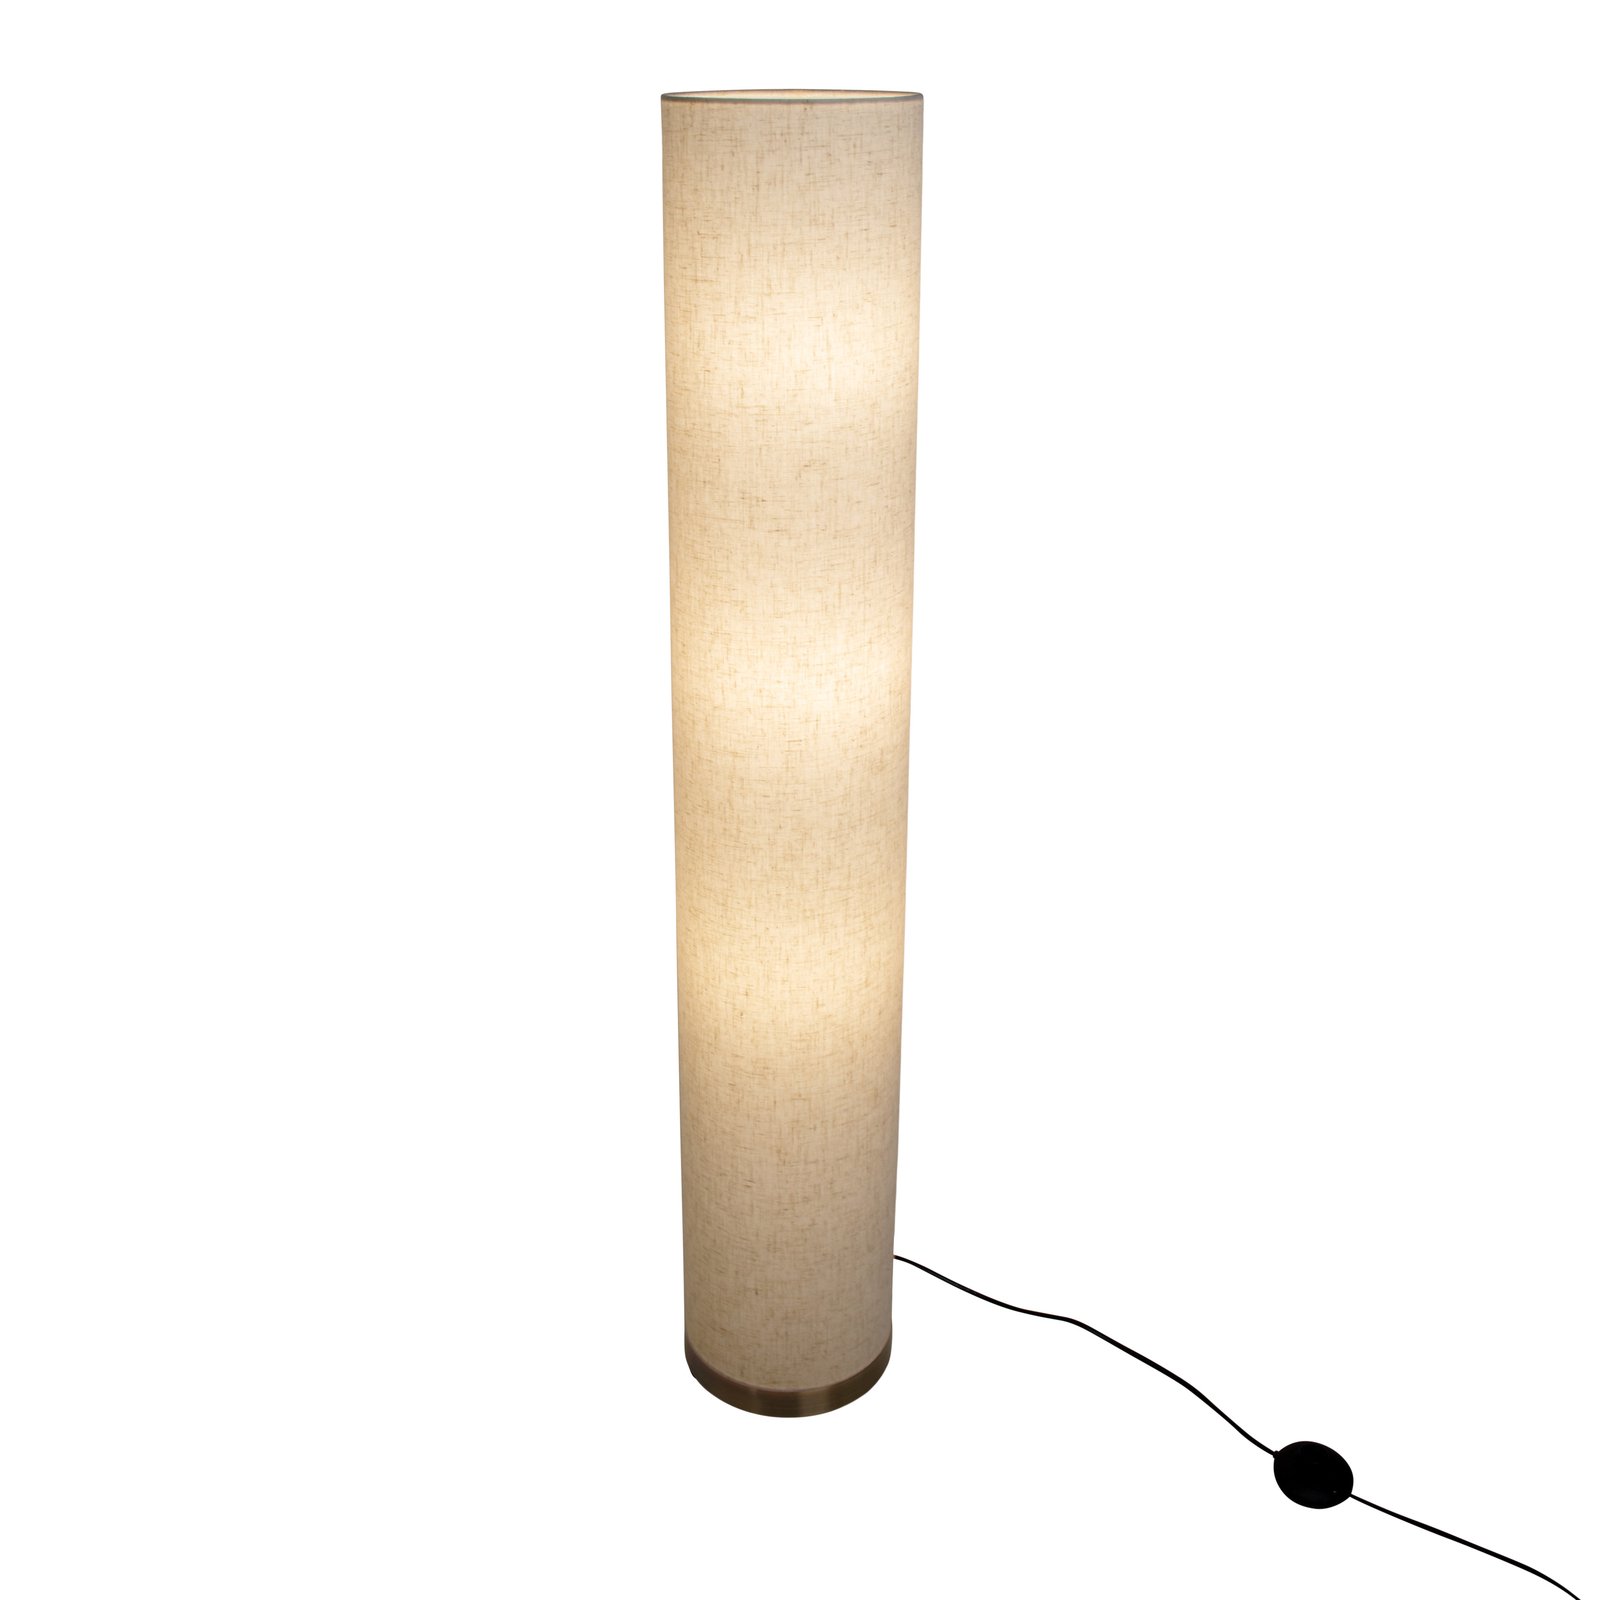 Nature floor lamp with a fabric lampshade